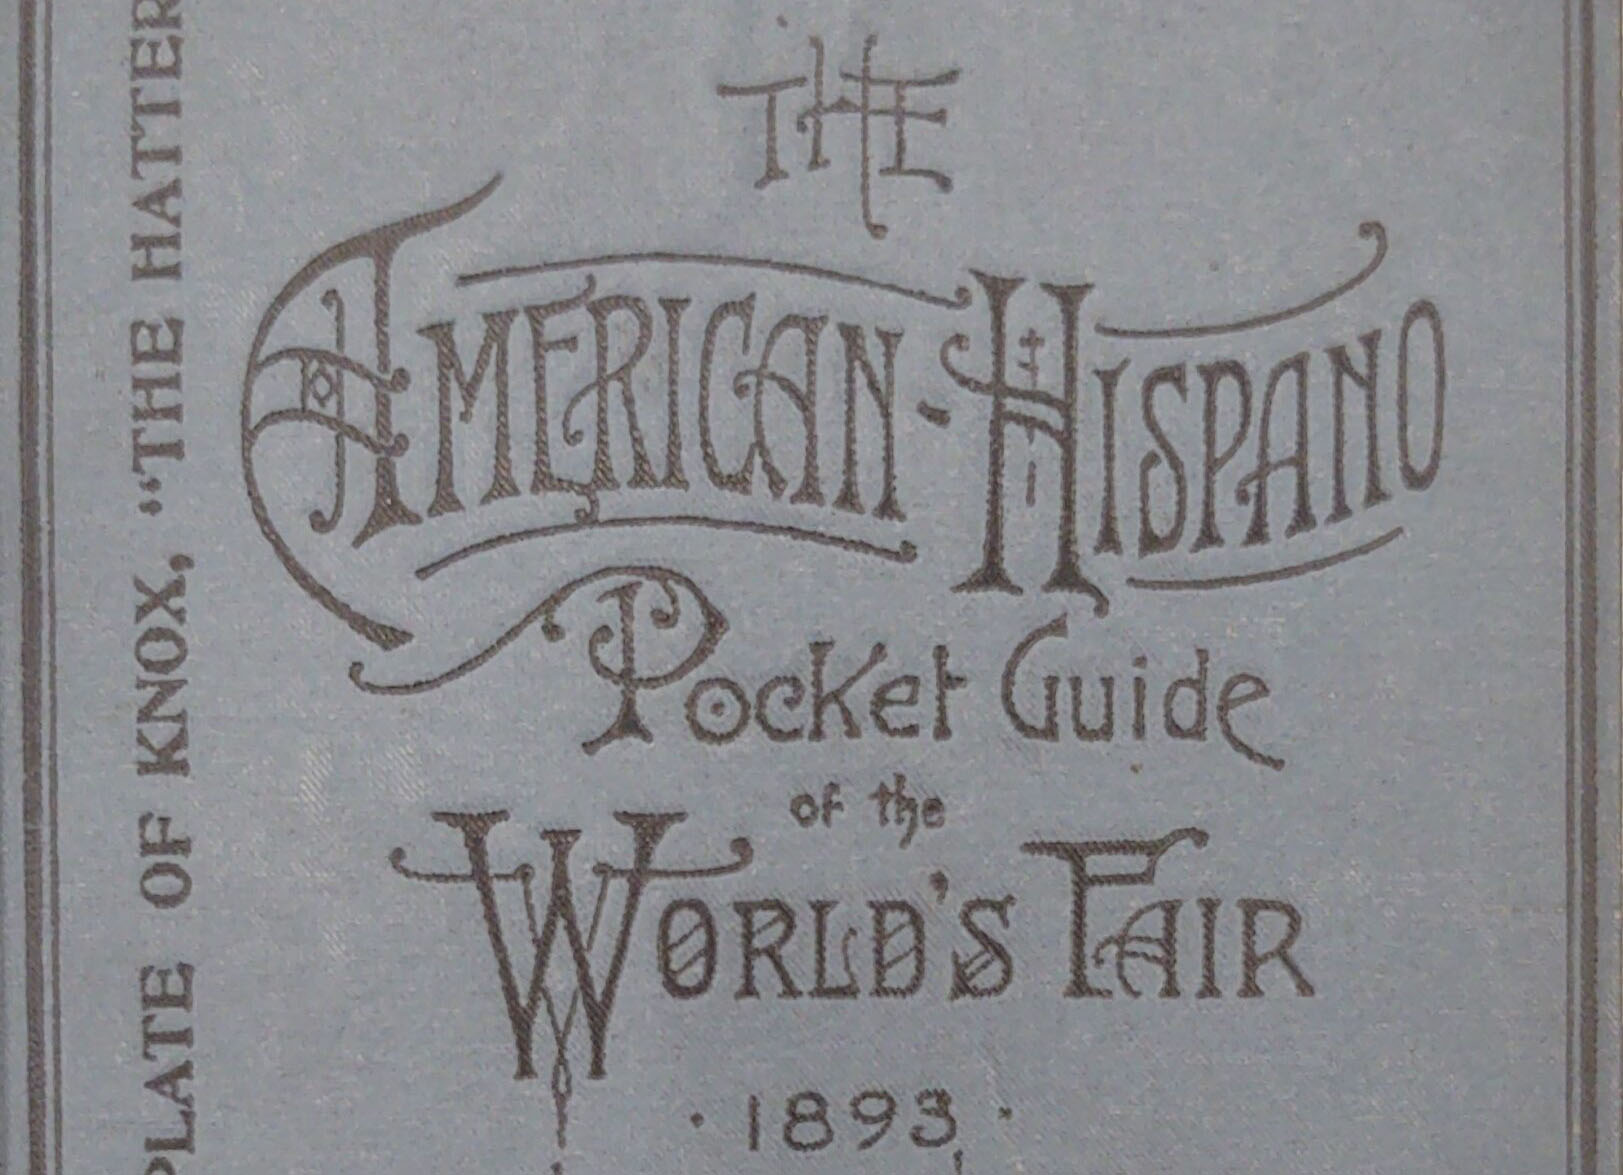 From Satire to Advertisement: A Literary Record of the 1893 World’s Fair